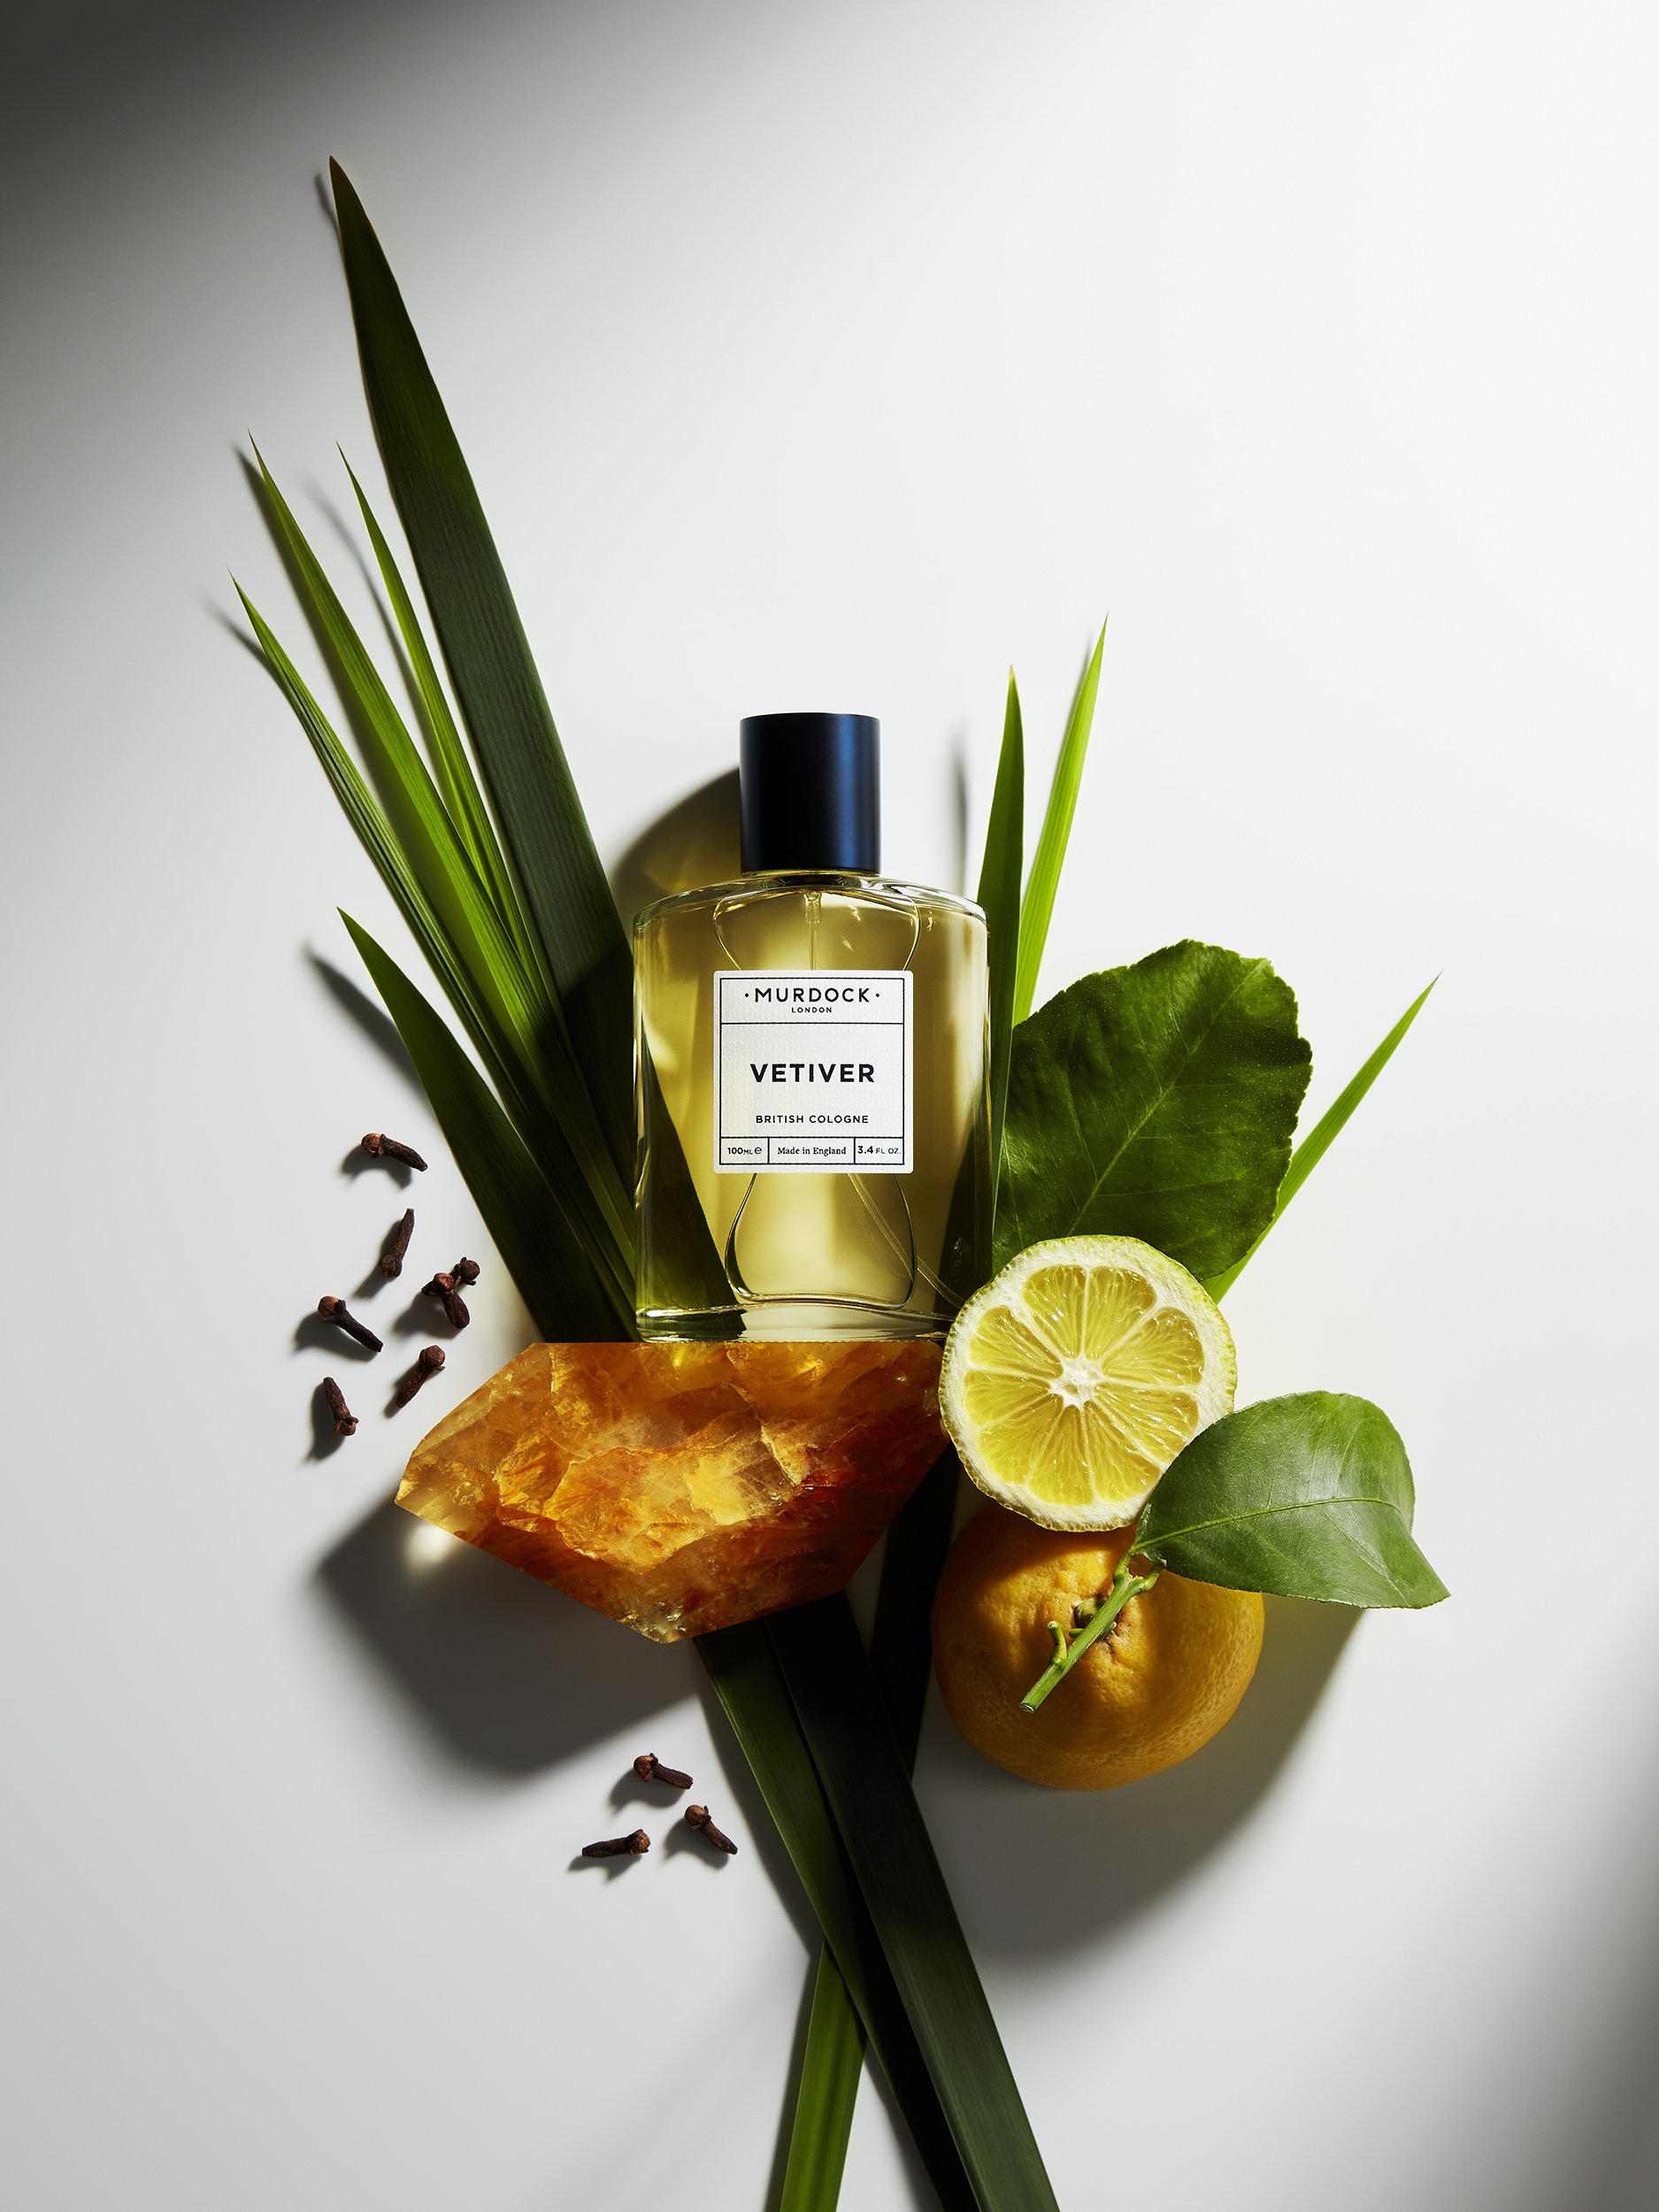 Murdock London Cologne - Fragrance photography by Simon Lyle Photography